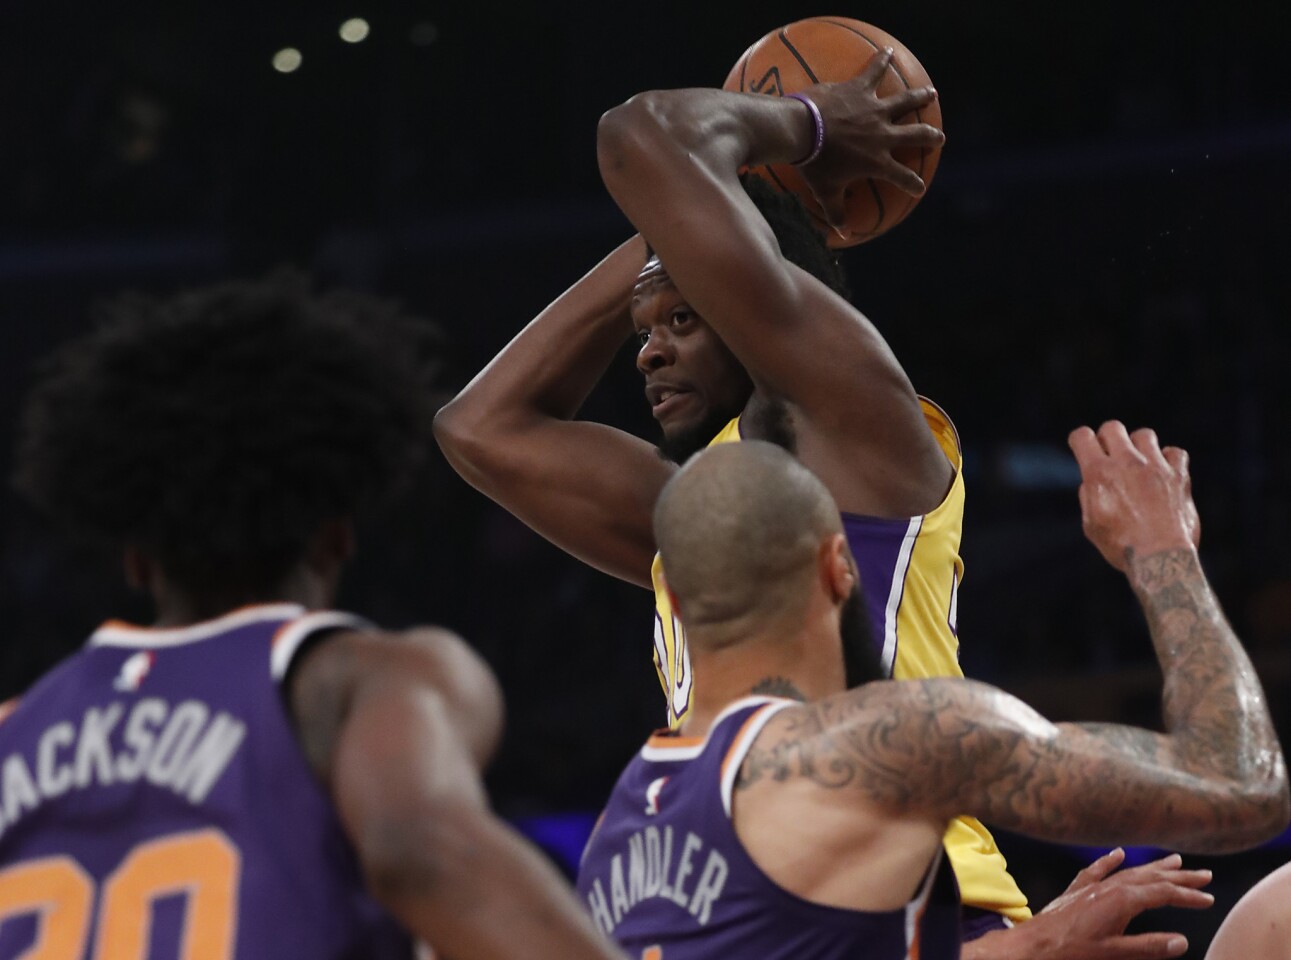 Lakers forward Julius Randle looks to pass during the first quarter of a game against the Suns on Tuesday at Staples Center.